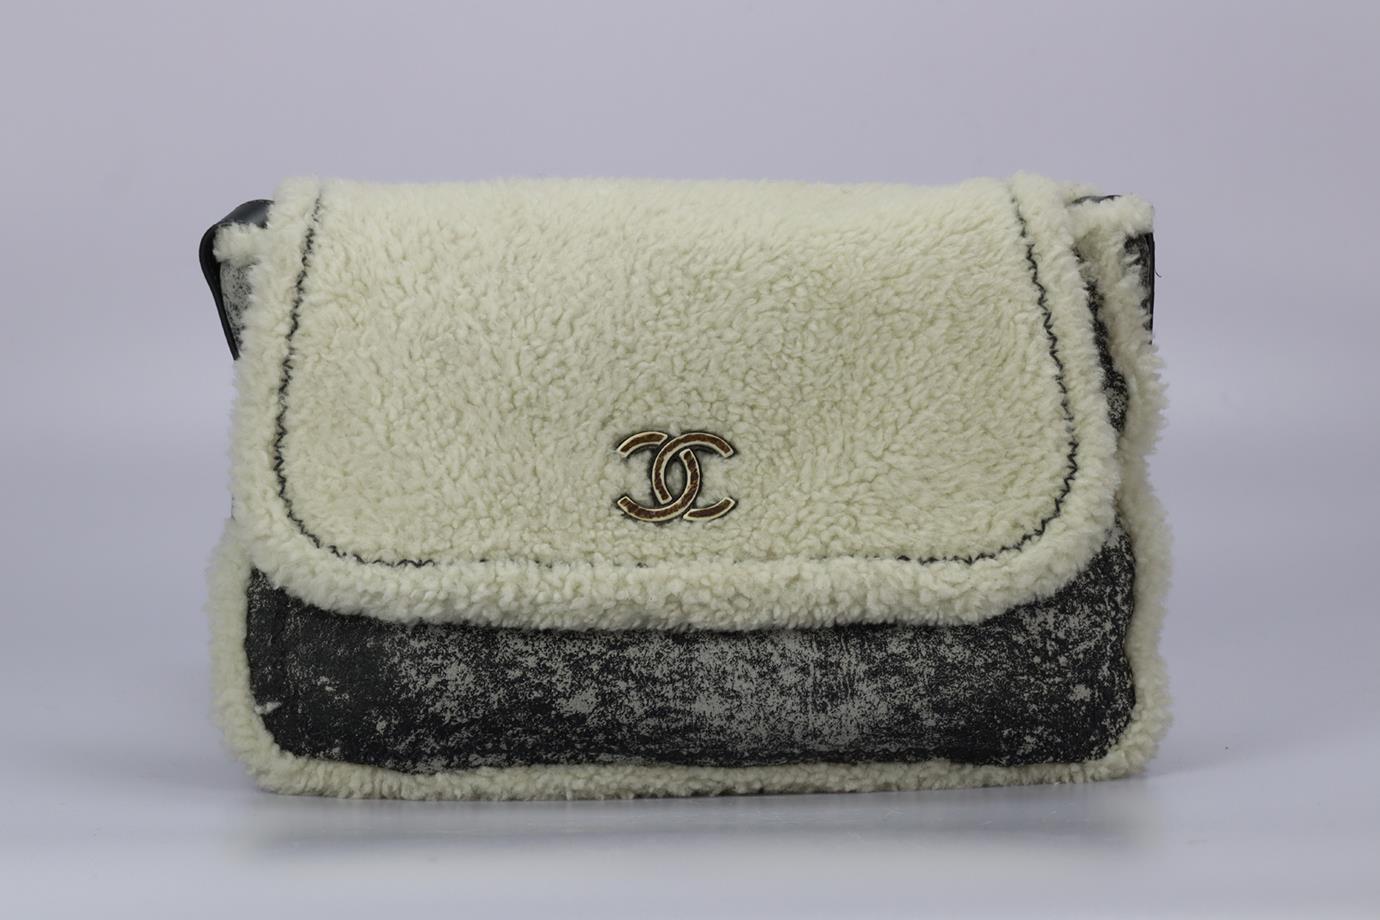 Chanel 2015 Messenger Shearling And Nubuck Shoulder Bag. Cream and grey. Open Top. Does not come with - dustbag or box. Height: 9.8 in. Width: 15.2 in. Depth: 3.5 in. Strap drop: 20 in. Condition: Used. Very good condition - Light signs of wear to